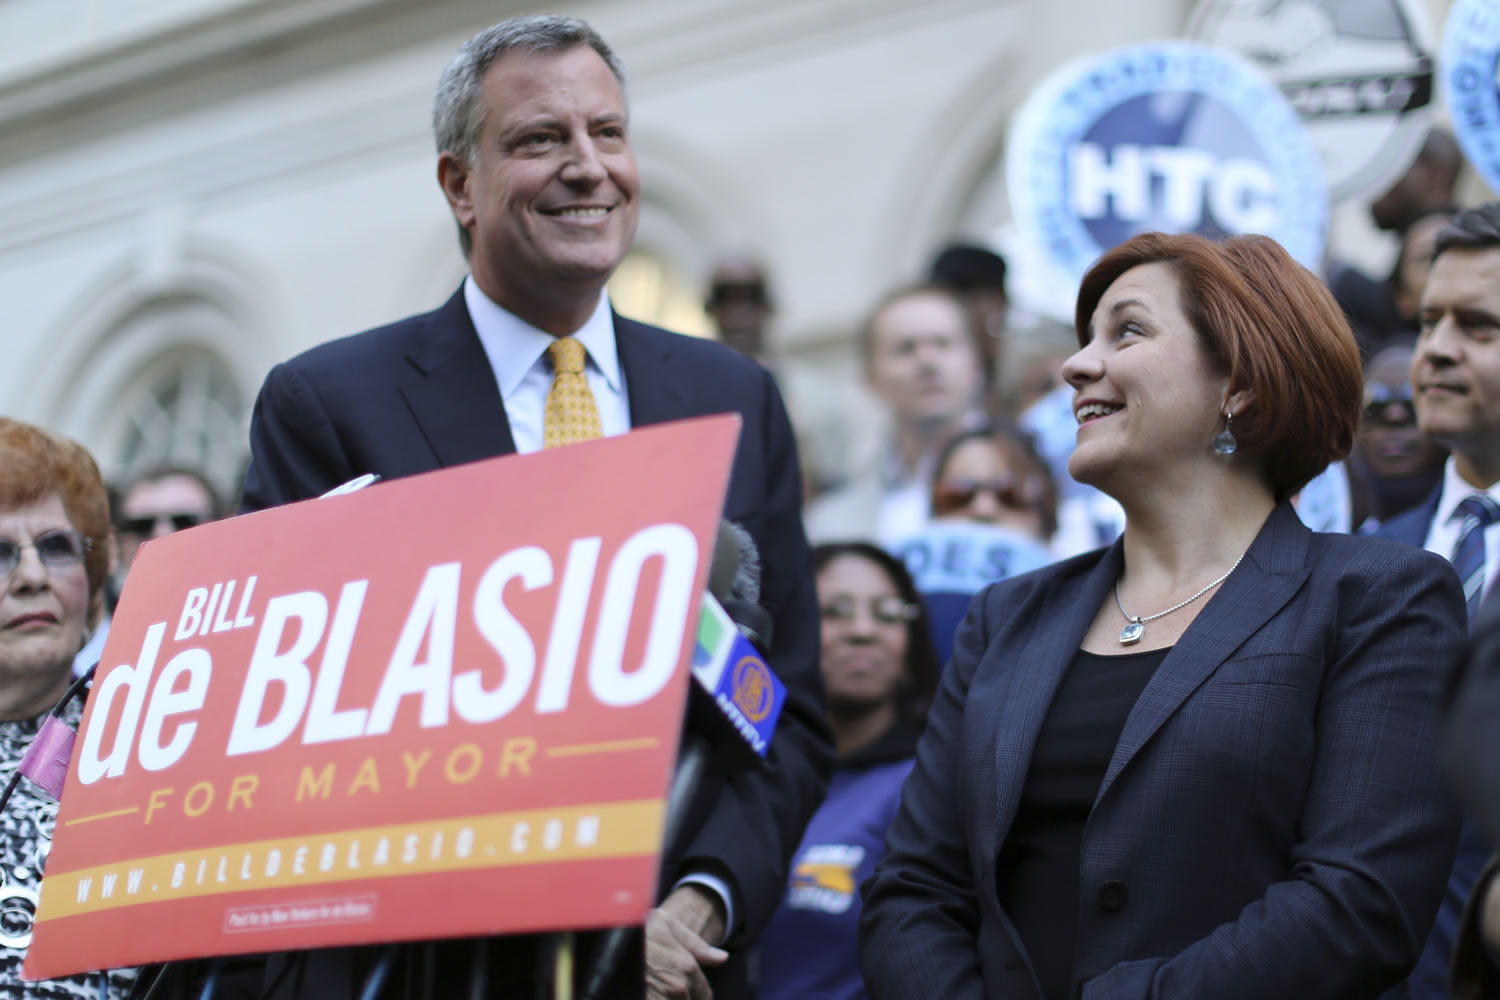 City Council speaker Christine Quinn, right, looks up at Democratic mayoral hopeful Bill de Blasio during a news conference on Tuesday on the steps of City Hall in New York. Quinn endorsed de Blasio for mayor. De Blasio will face Republican nominee Joe Lhota in the Nov.